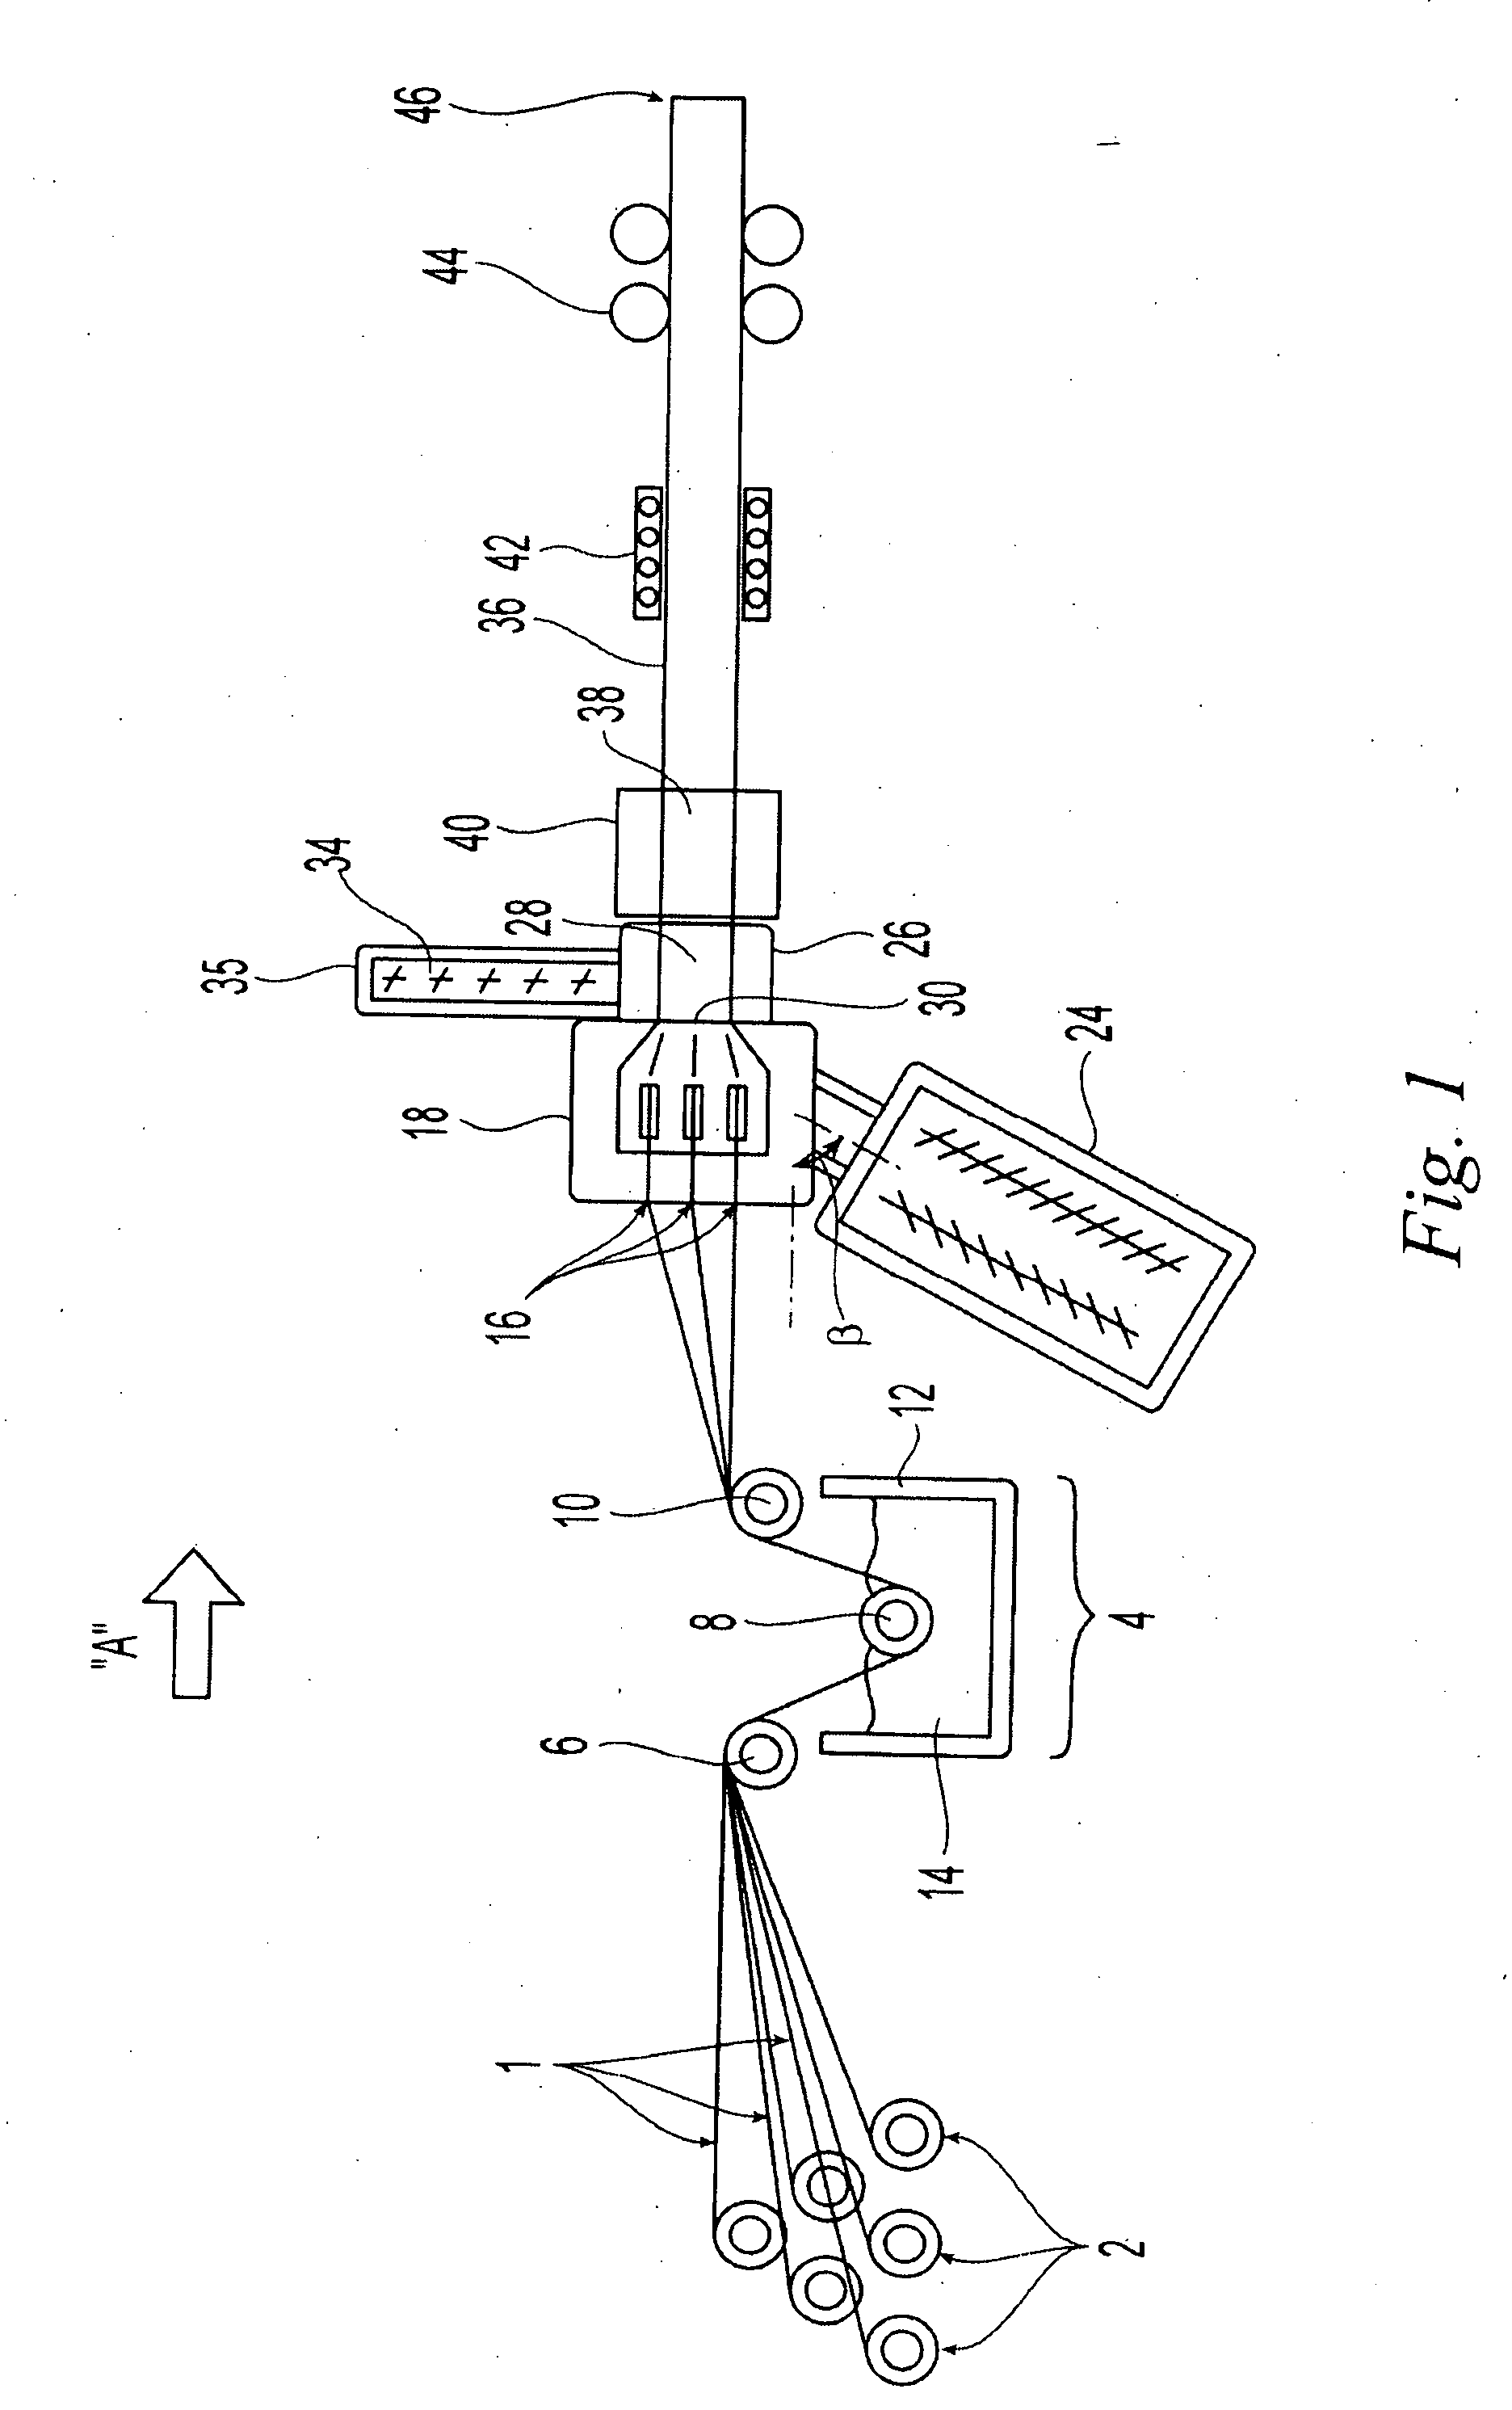 Method of making continuous filament reinforced structural plastic profiles using pultrusion/coextrusion